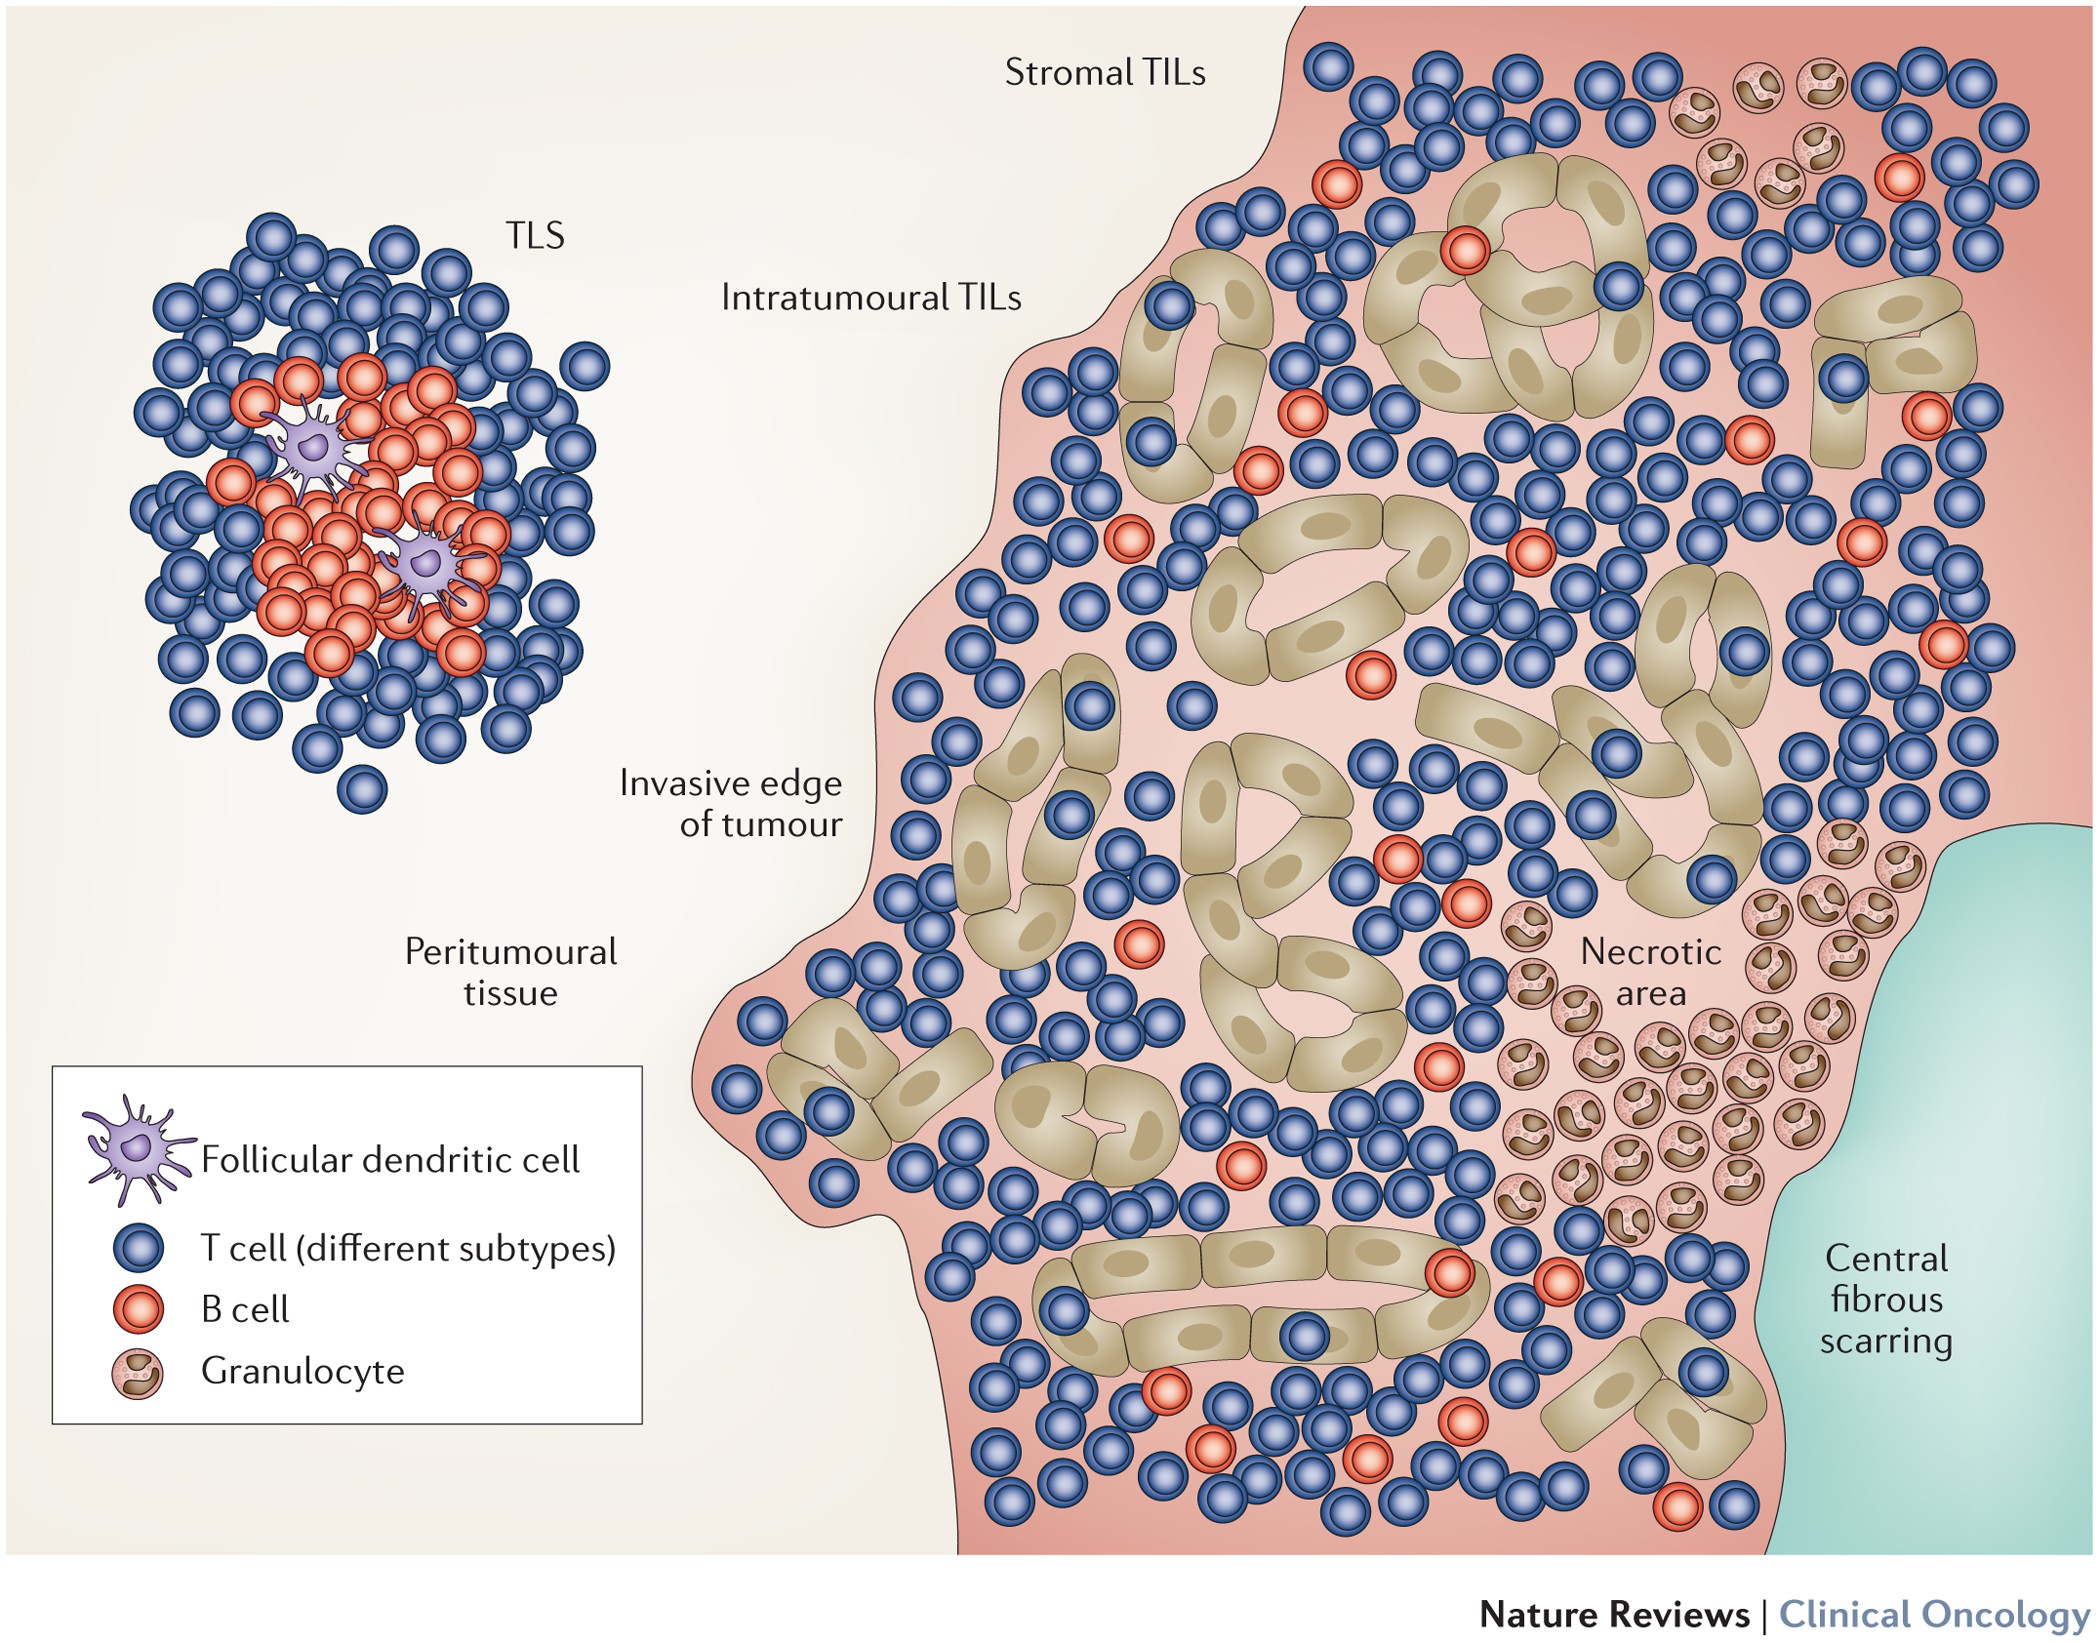 Clinical relevance host immunity in cancer: from TILs to the | Nature Reviews Clinical